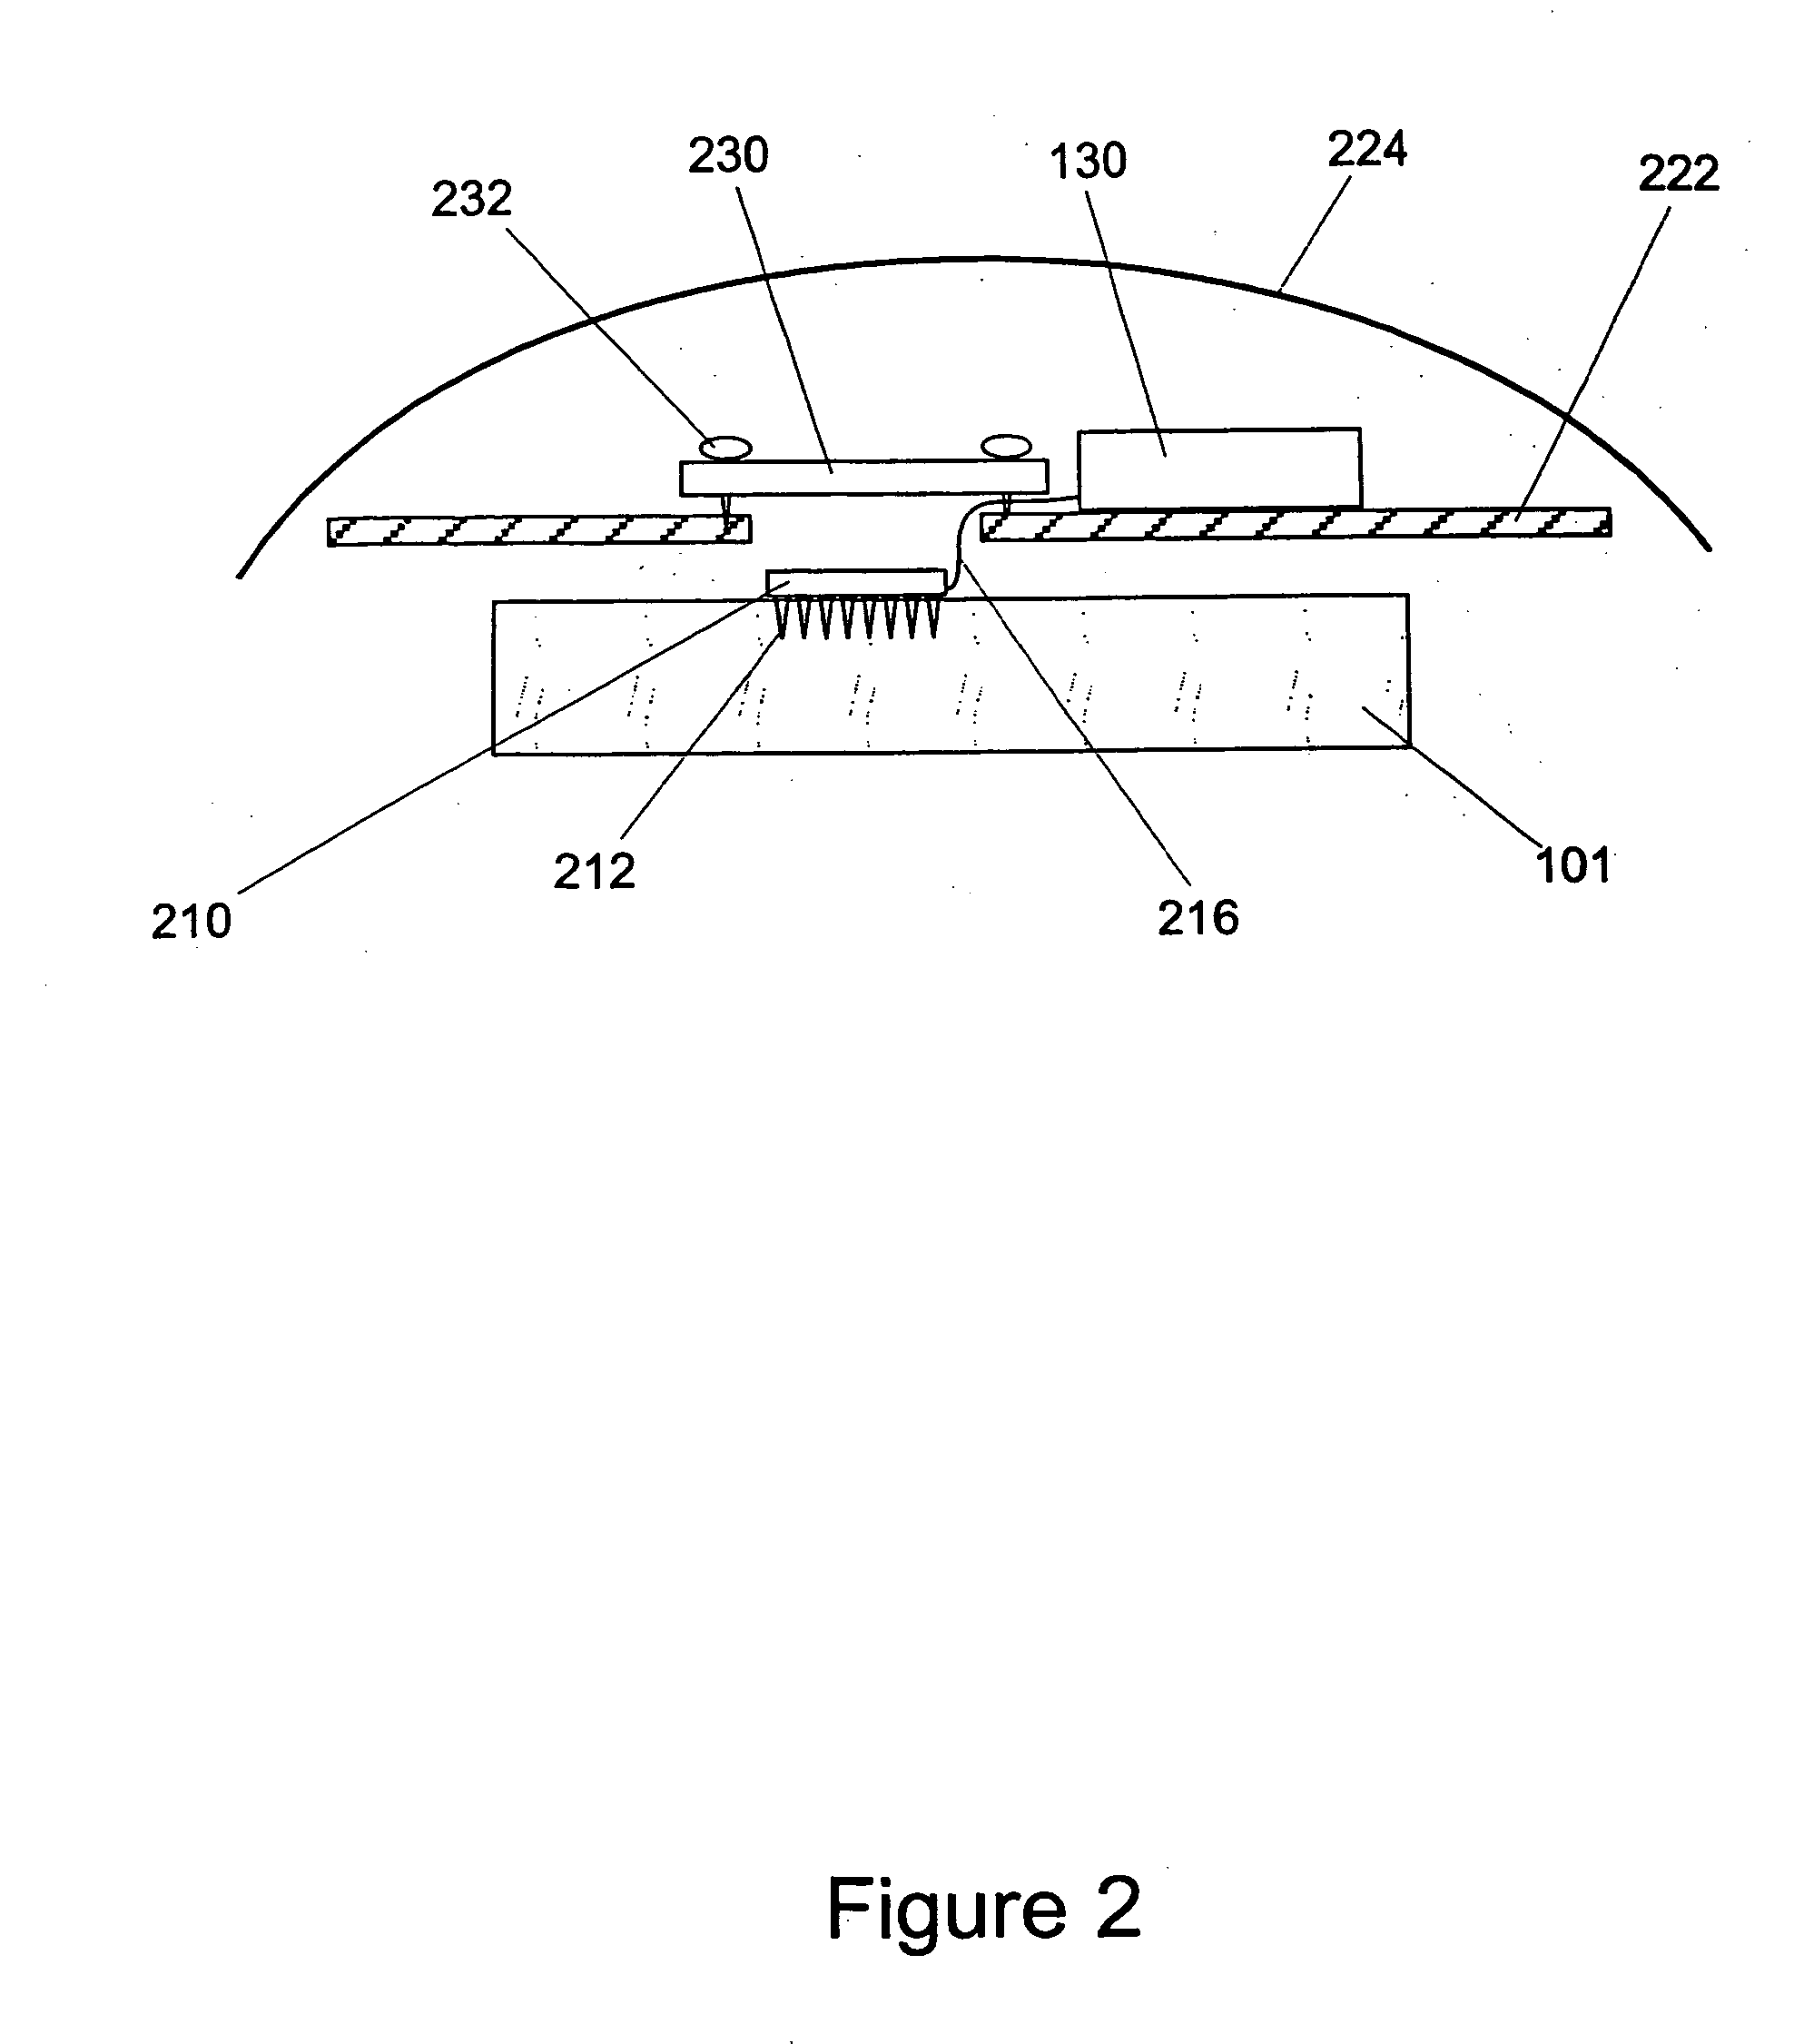 Neural interface system and method for neural control of multiple devices